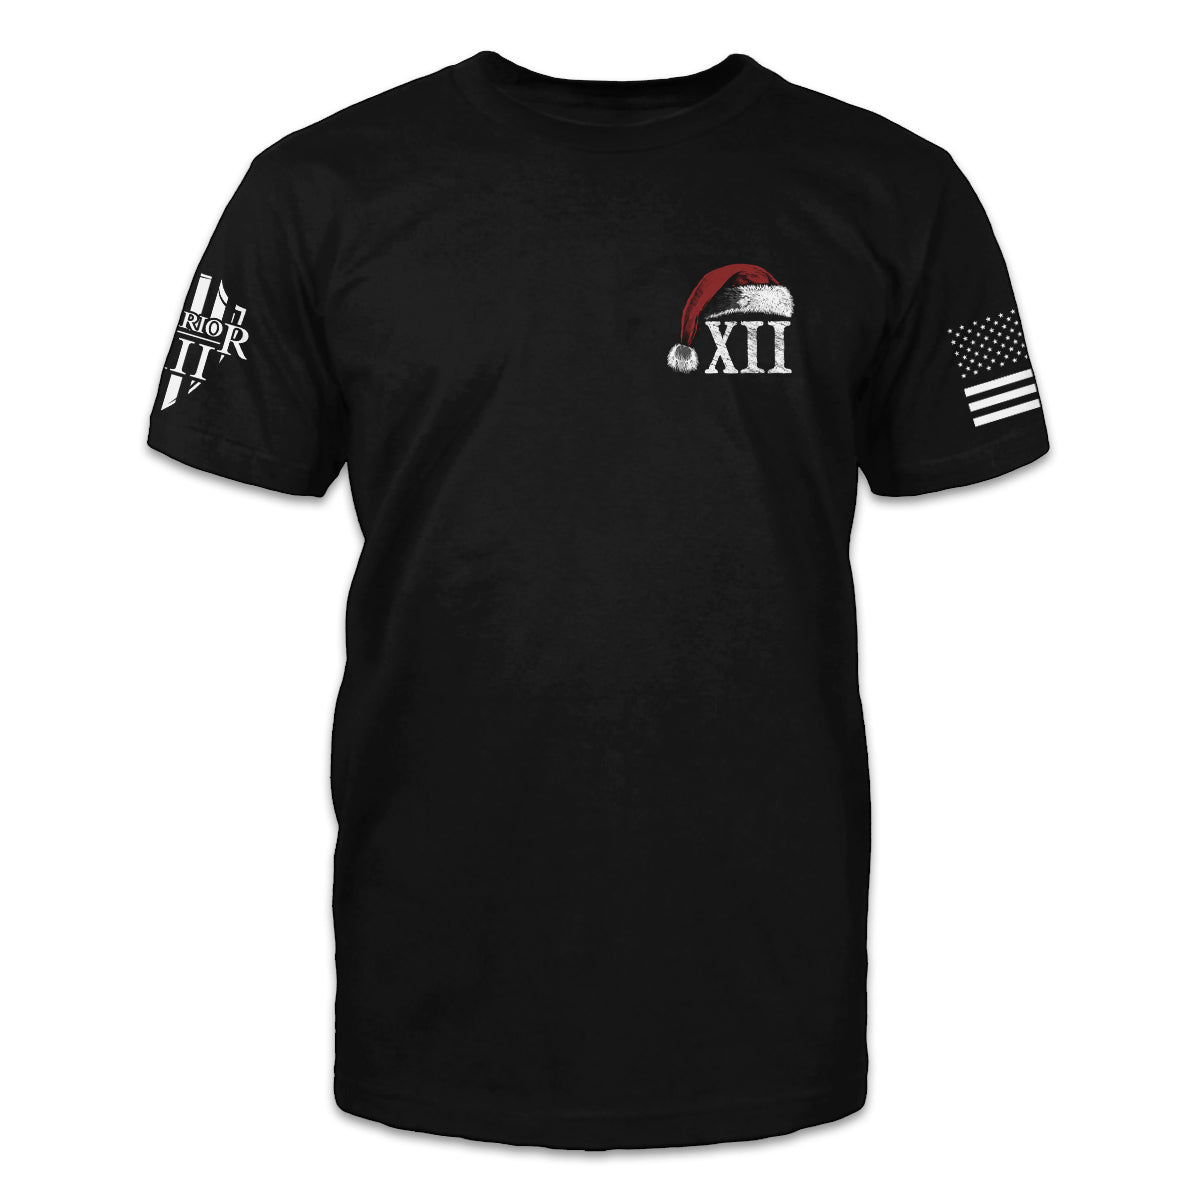 The front of "Say Hello To My Little Friends" featuring small chest print of Santa hat with the roman numerals XII on the upper left side.